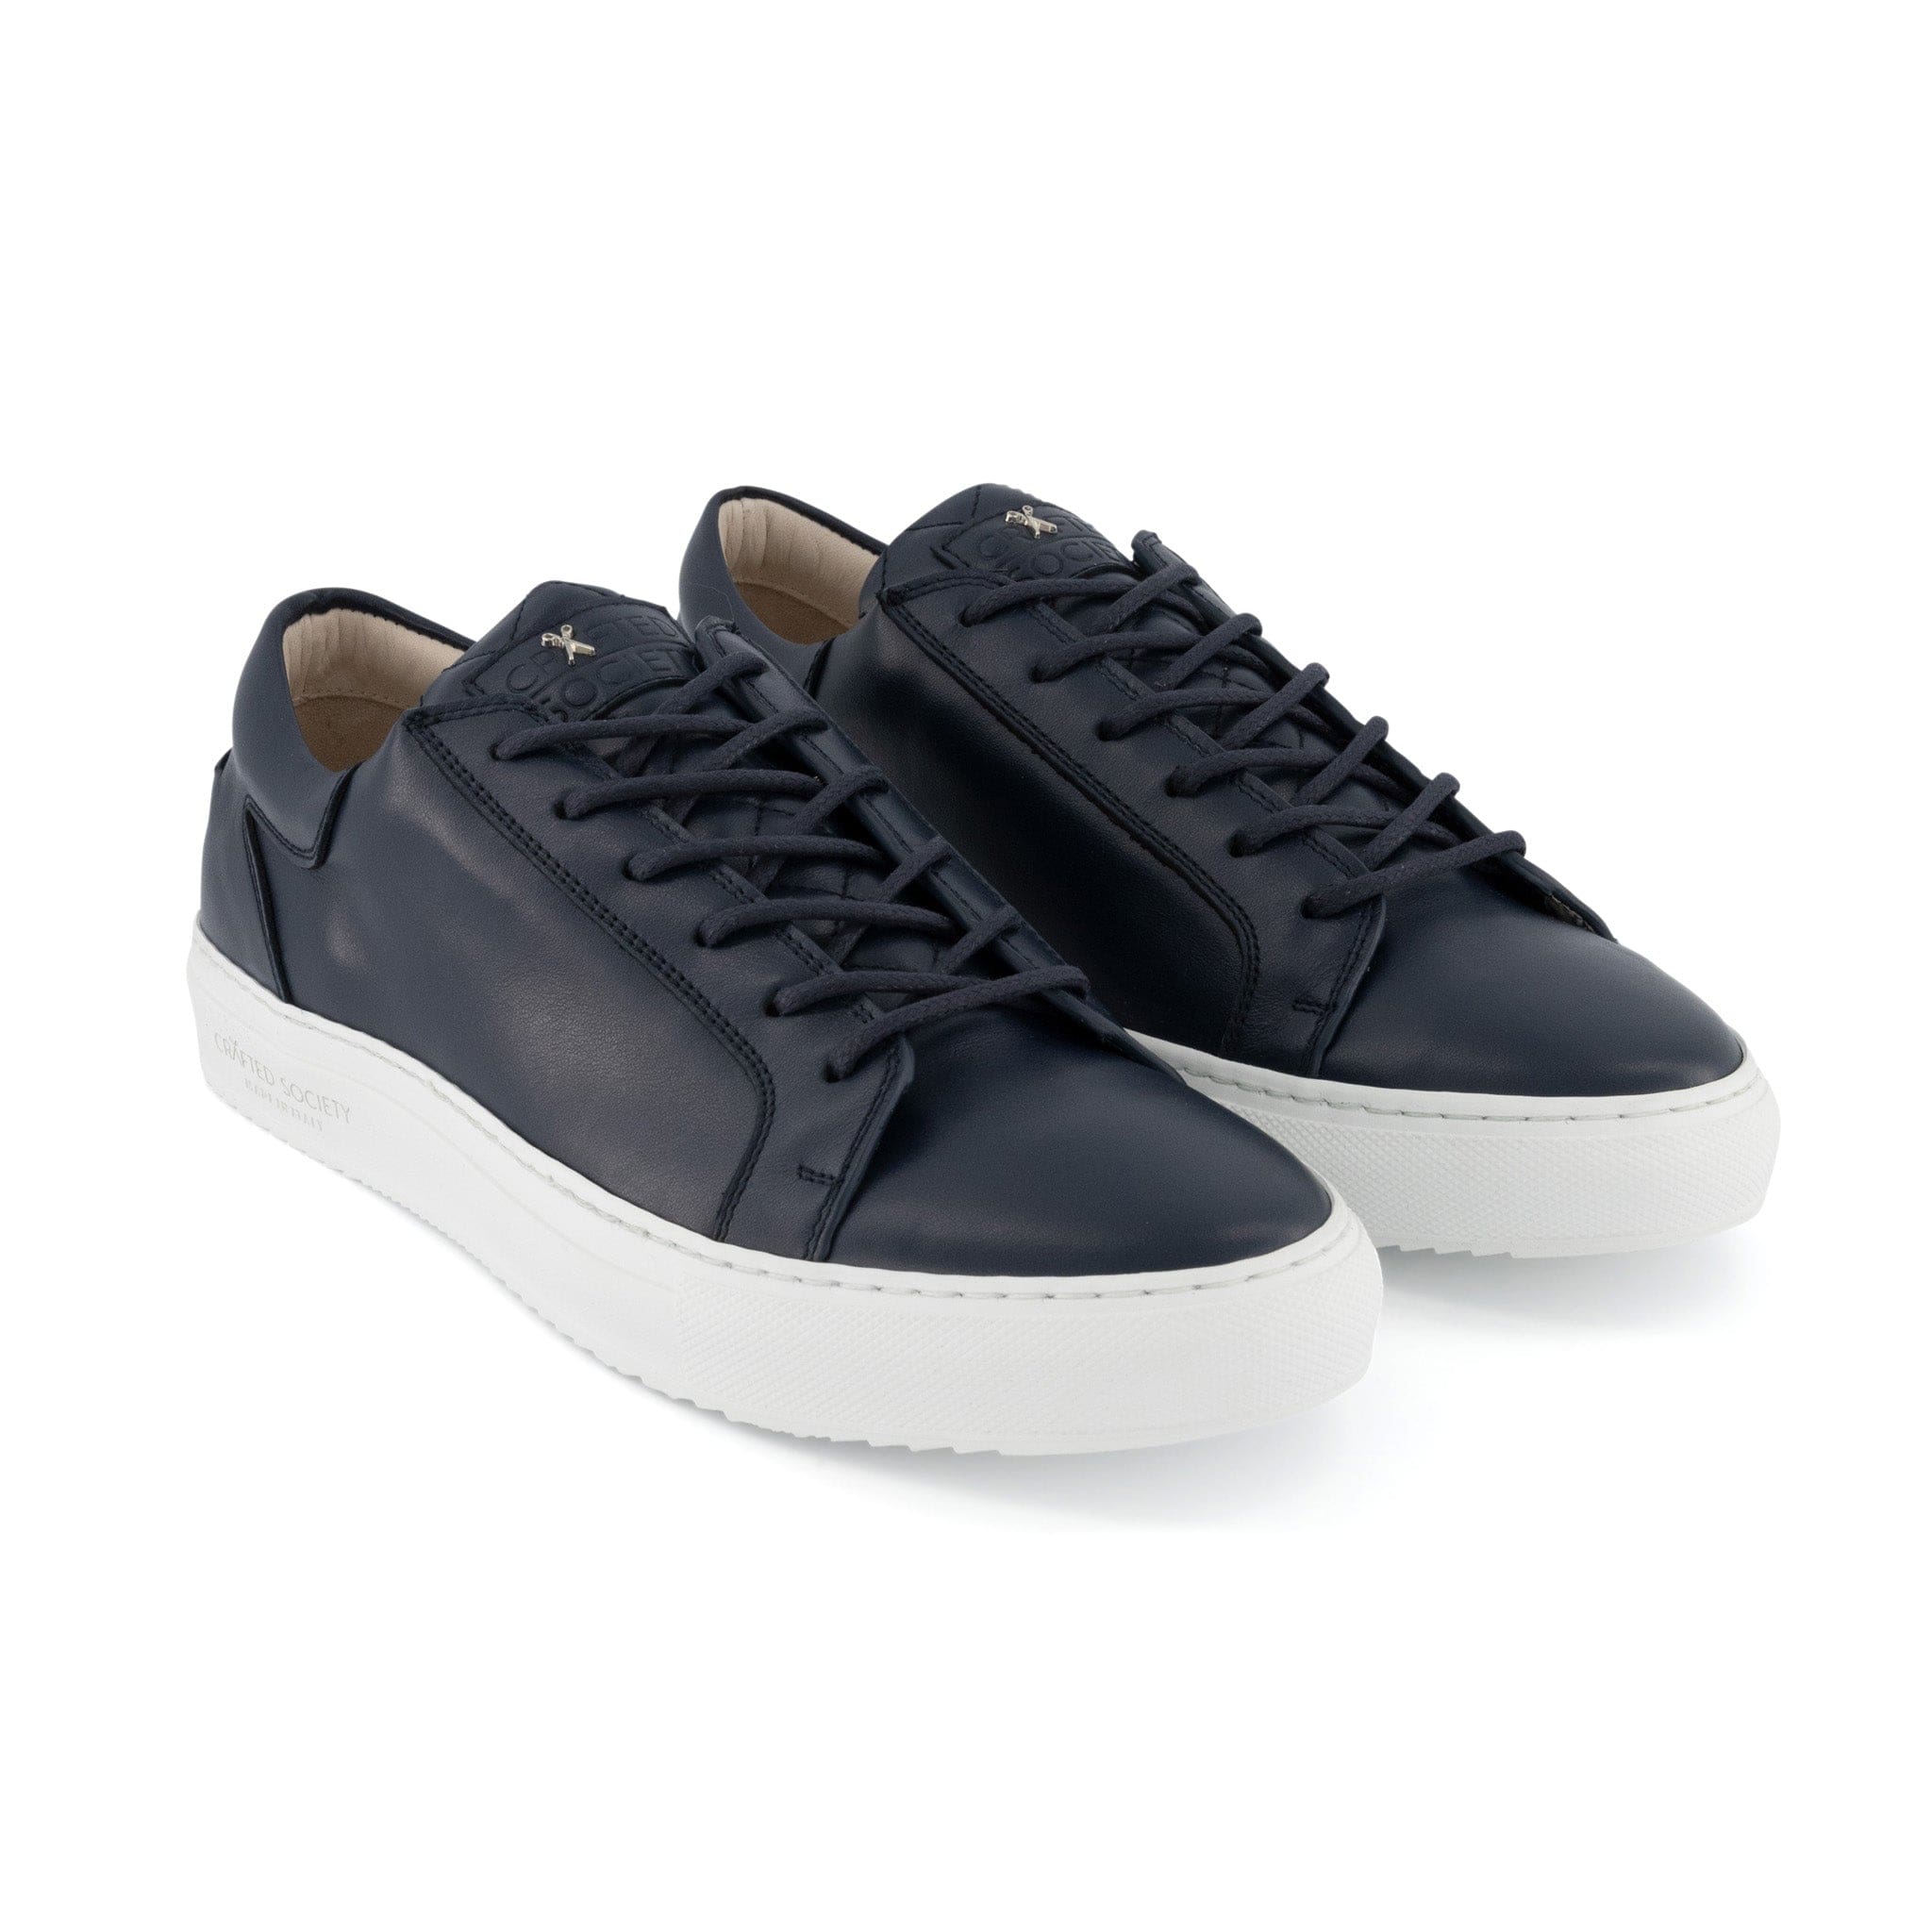 Italic - Men's Cadence Leather Sneakers | Leather sneakers, Dress shoes  men, Sneakers